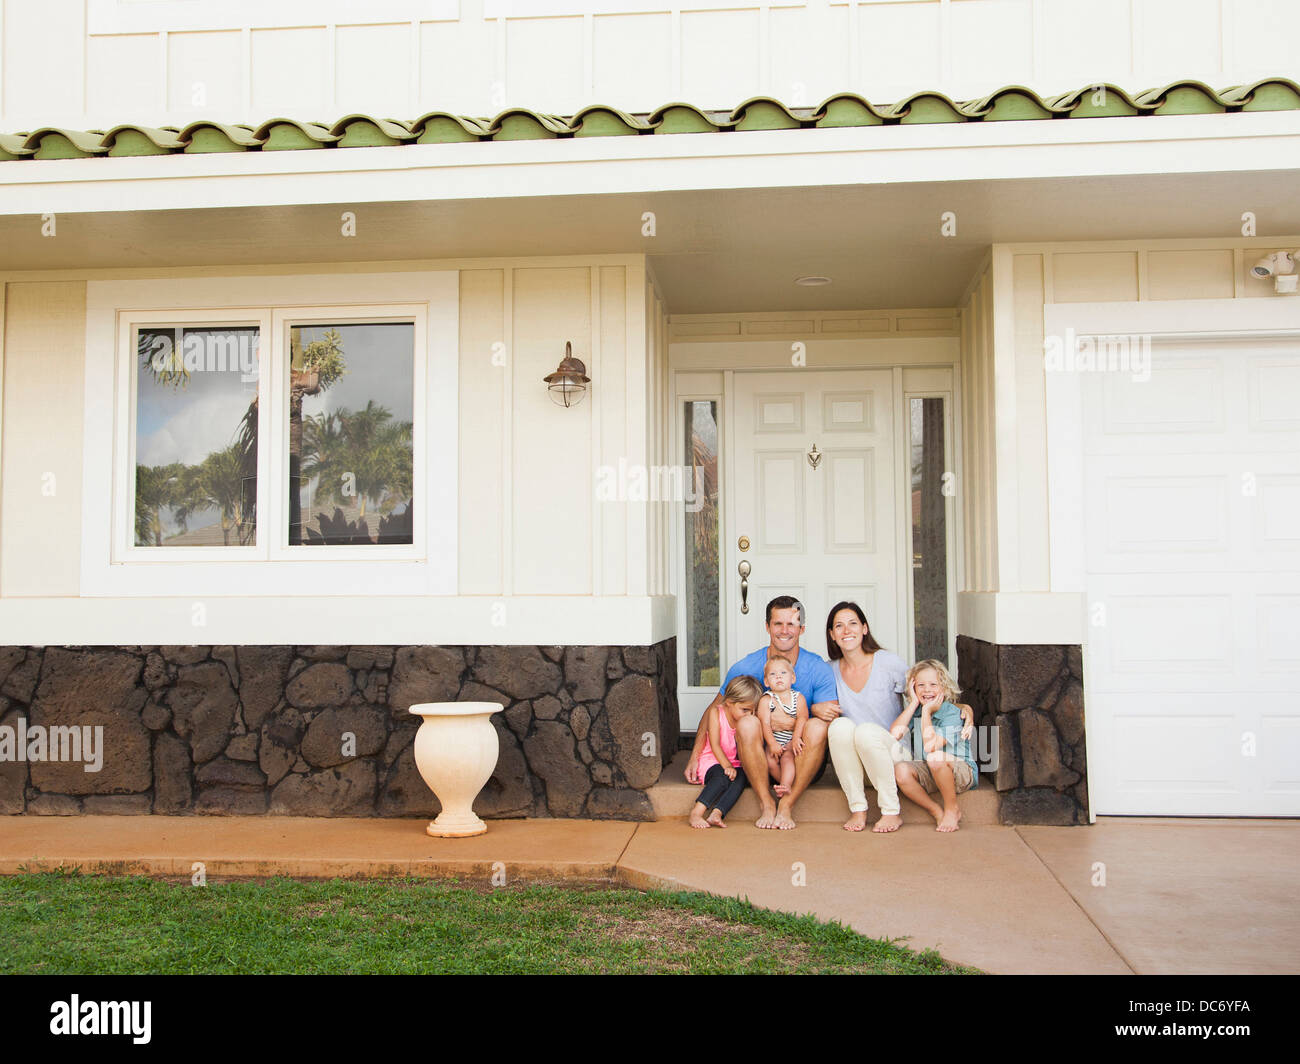 USA, Hawaii, Kauai, Family with three kids (6-7, 2-3, 6-11 months) sitting in front of house Stock Photo